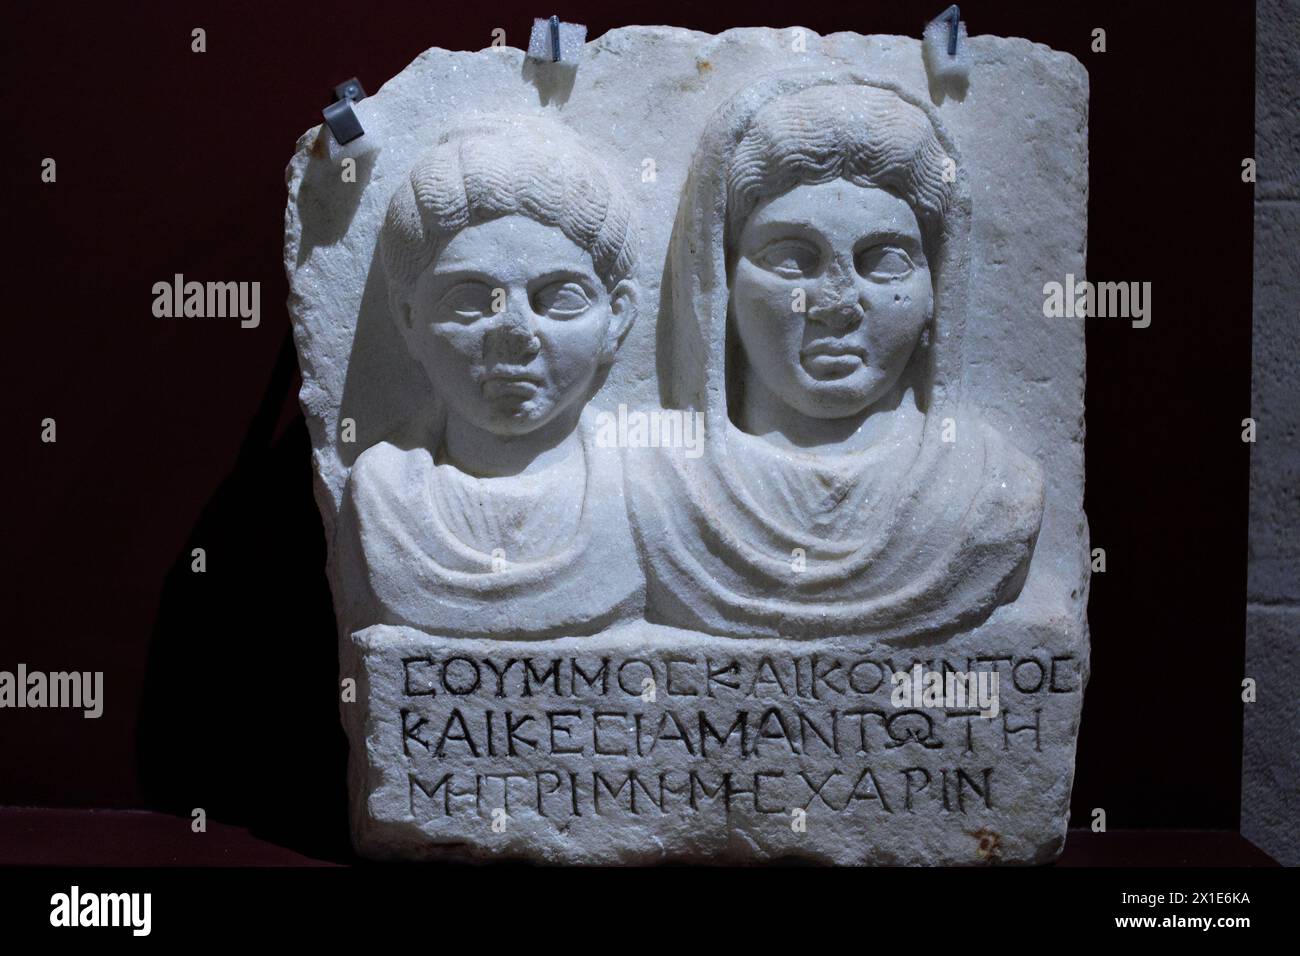 Funerary relief sculpture of Mantô (right - the deceased) and her daughter Késia, from 3rd century AD, Macedonia, at Lapidary Museum, Avignon, France Stock Photo